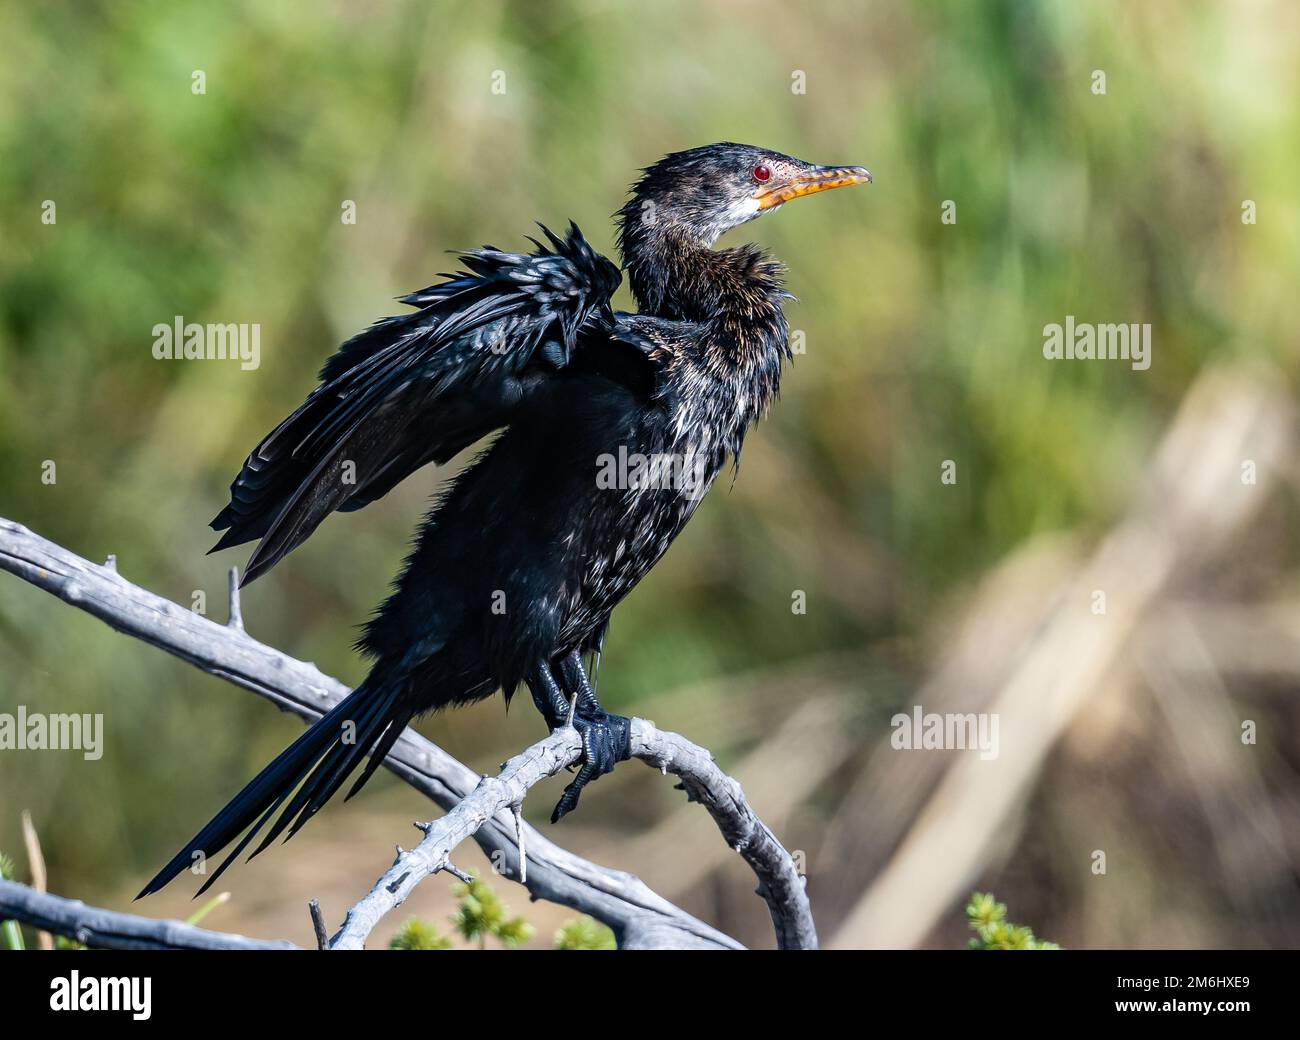 A Long-tailed Cormorant (Microcarbo africanus) perched on a branch. Augrabies Falls National Park, South Africa. Stock Photo